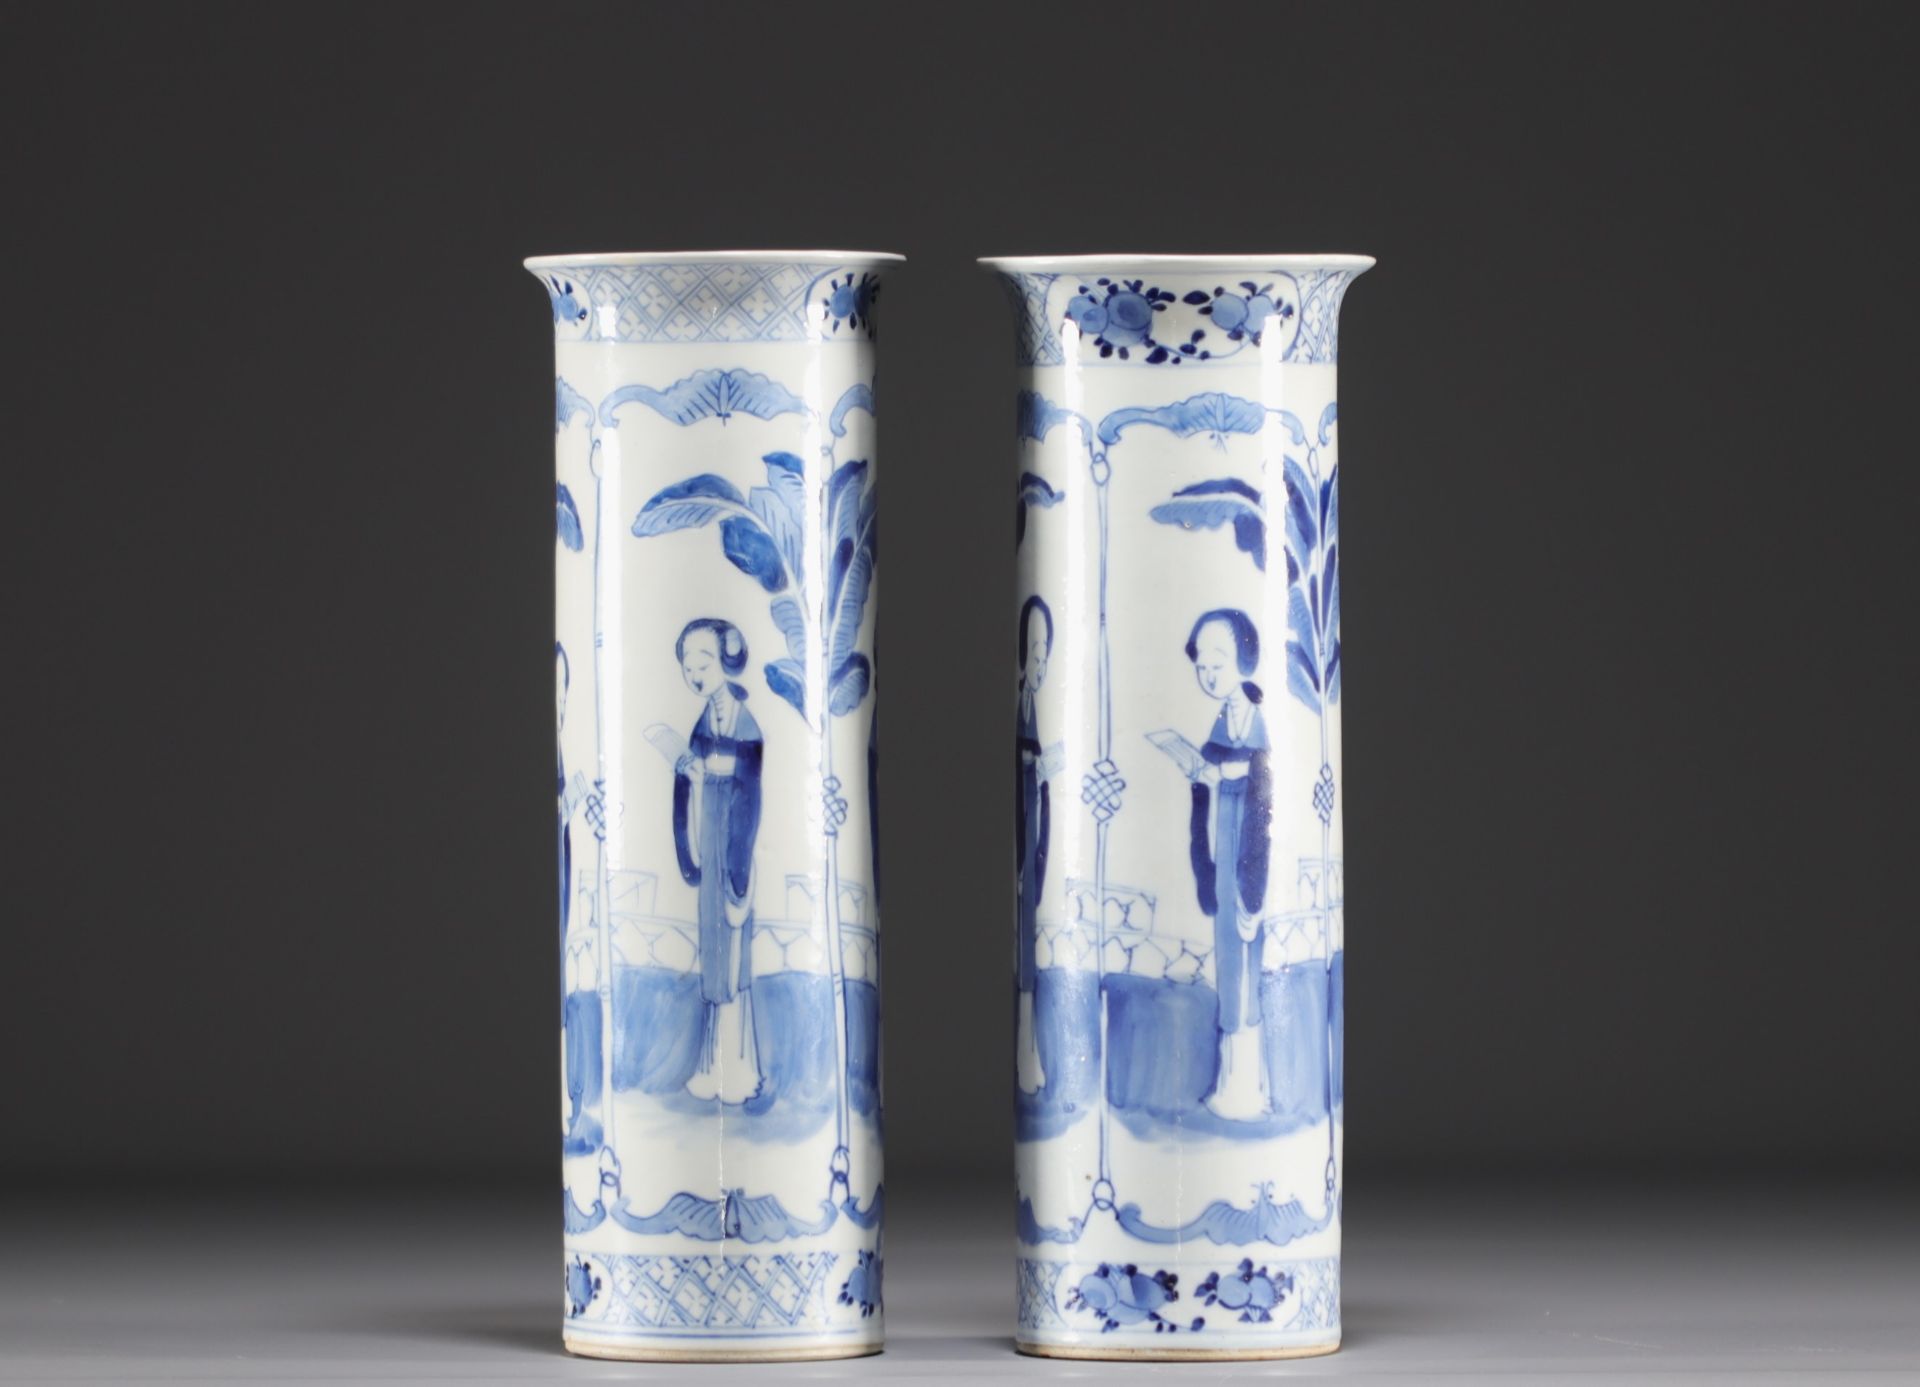 China - Pair of blue-white porcelain vases decorated with ladies and bats, Kanjxi mark, 19th century